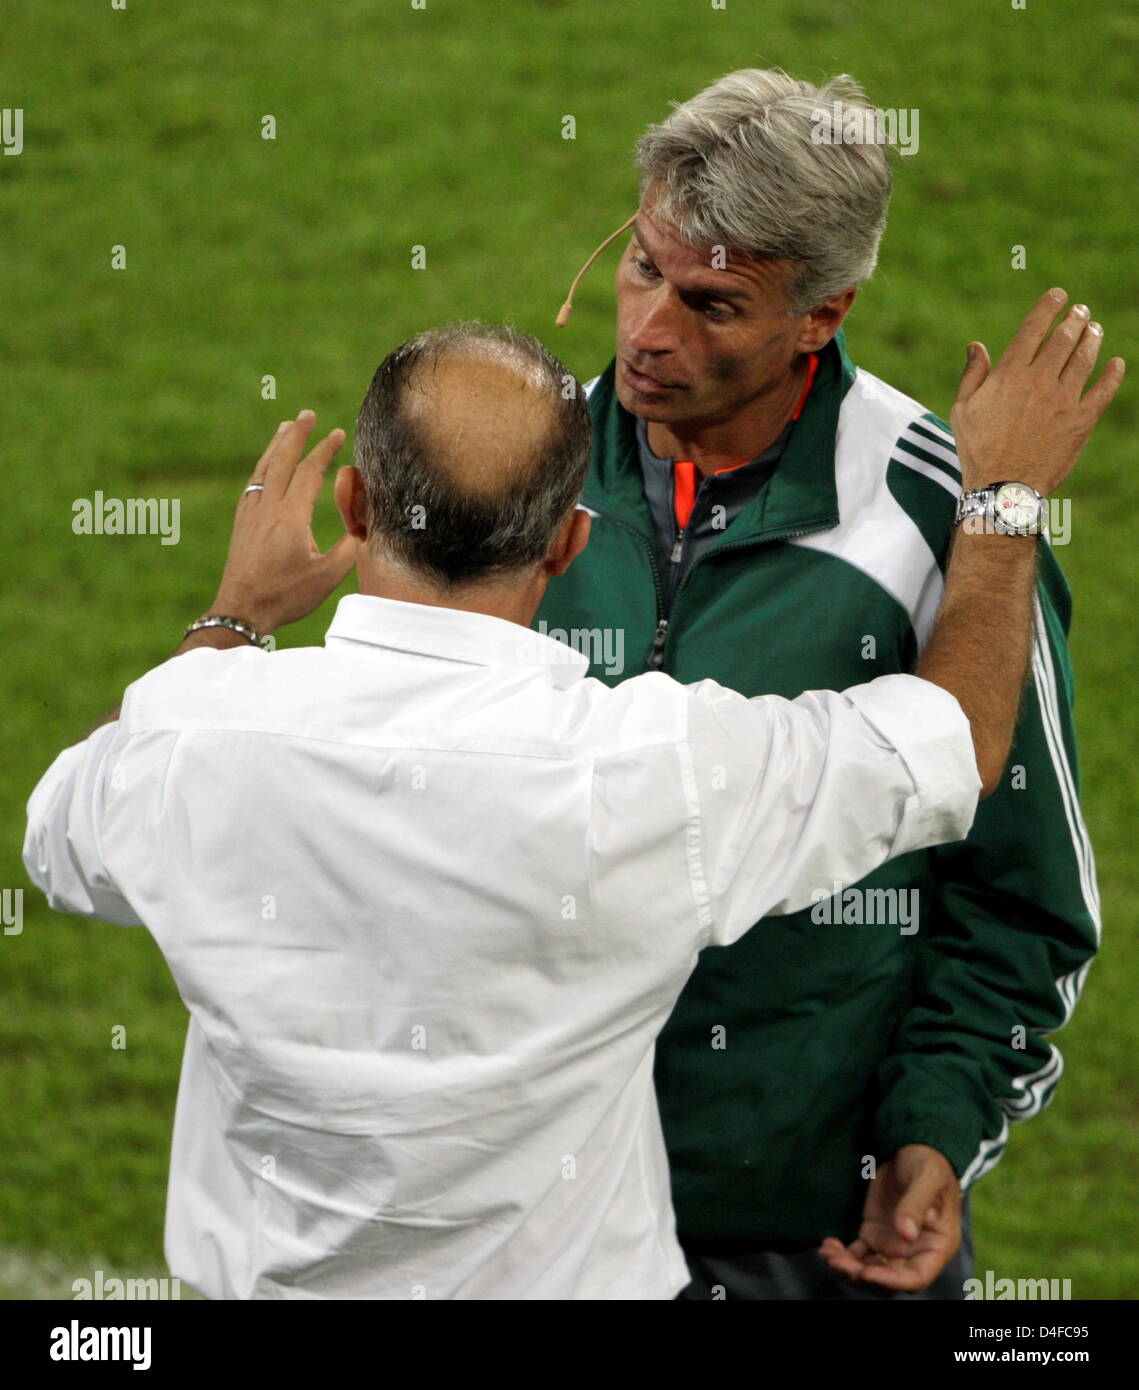 Turkish head coach Fatih Terim talks to the fourth official Peter Fröjdfeldt (R) from Sweden during the UEFA EURO 2008 semifinal match between Germany and Turkey at the St. Jakob-Park stadium in Basel, Switzerland, 25 June 2008. Photo: Oliver Berg dpa +please note UEFA restrictions particulary in regard to slide shows and 'No Mobile Services'+ +++(c) dpa - Bildfunk+++ Stock Photo